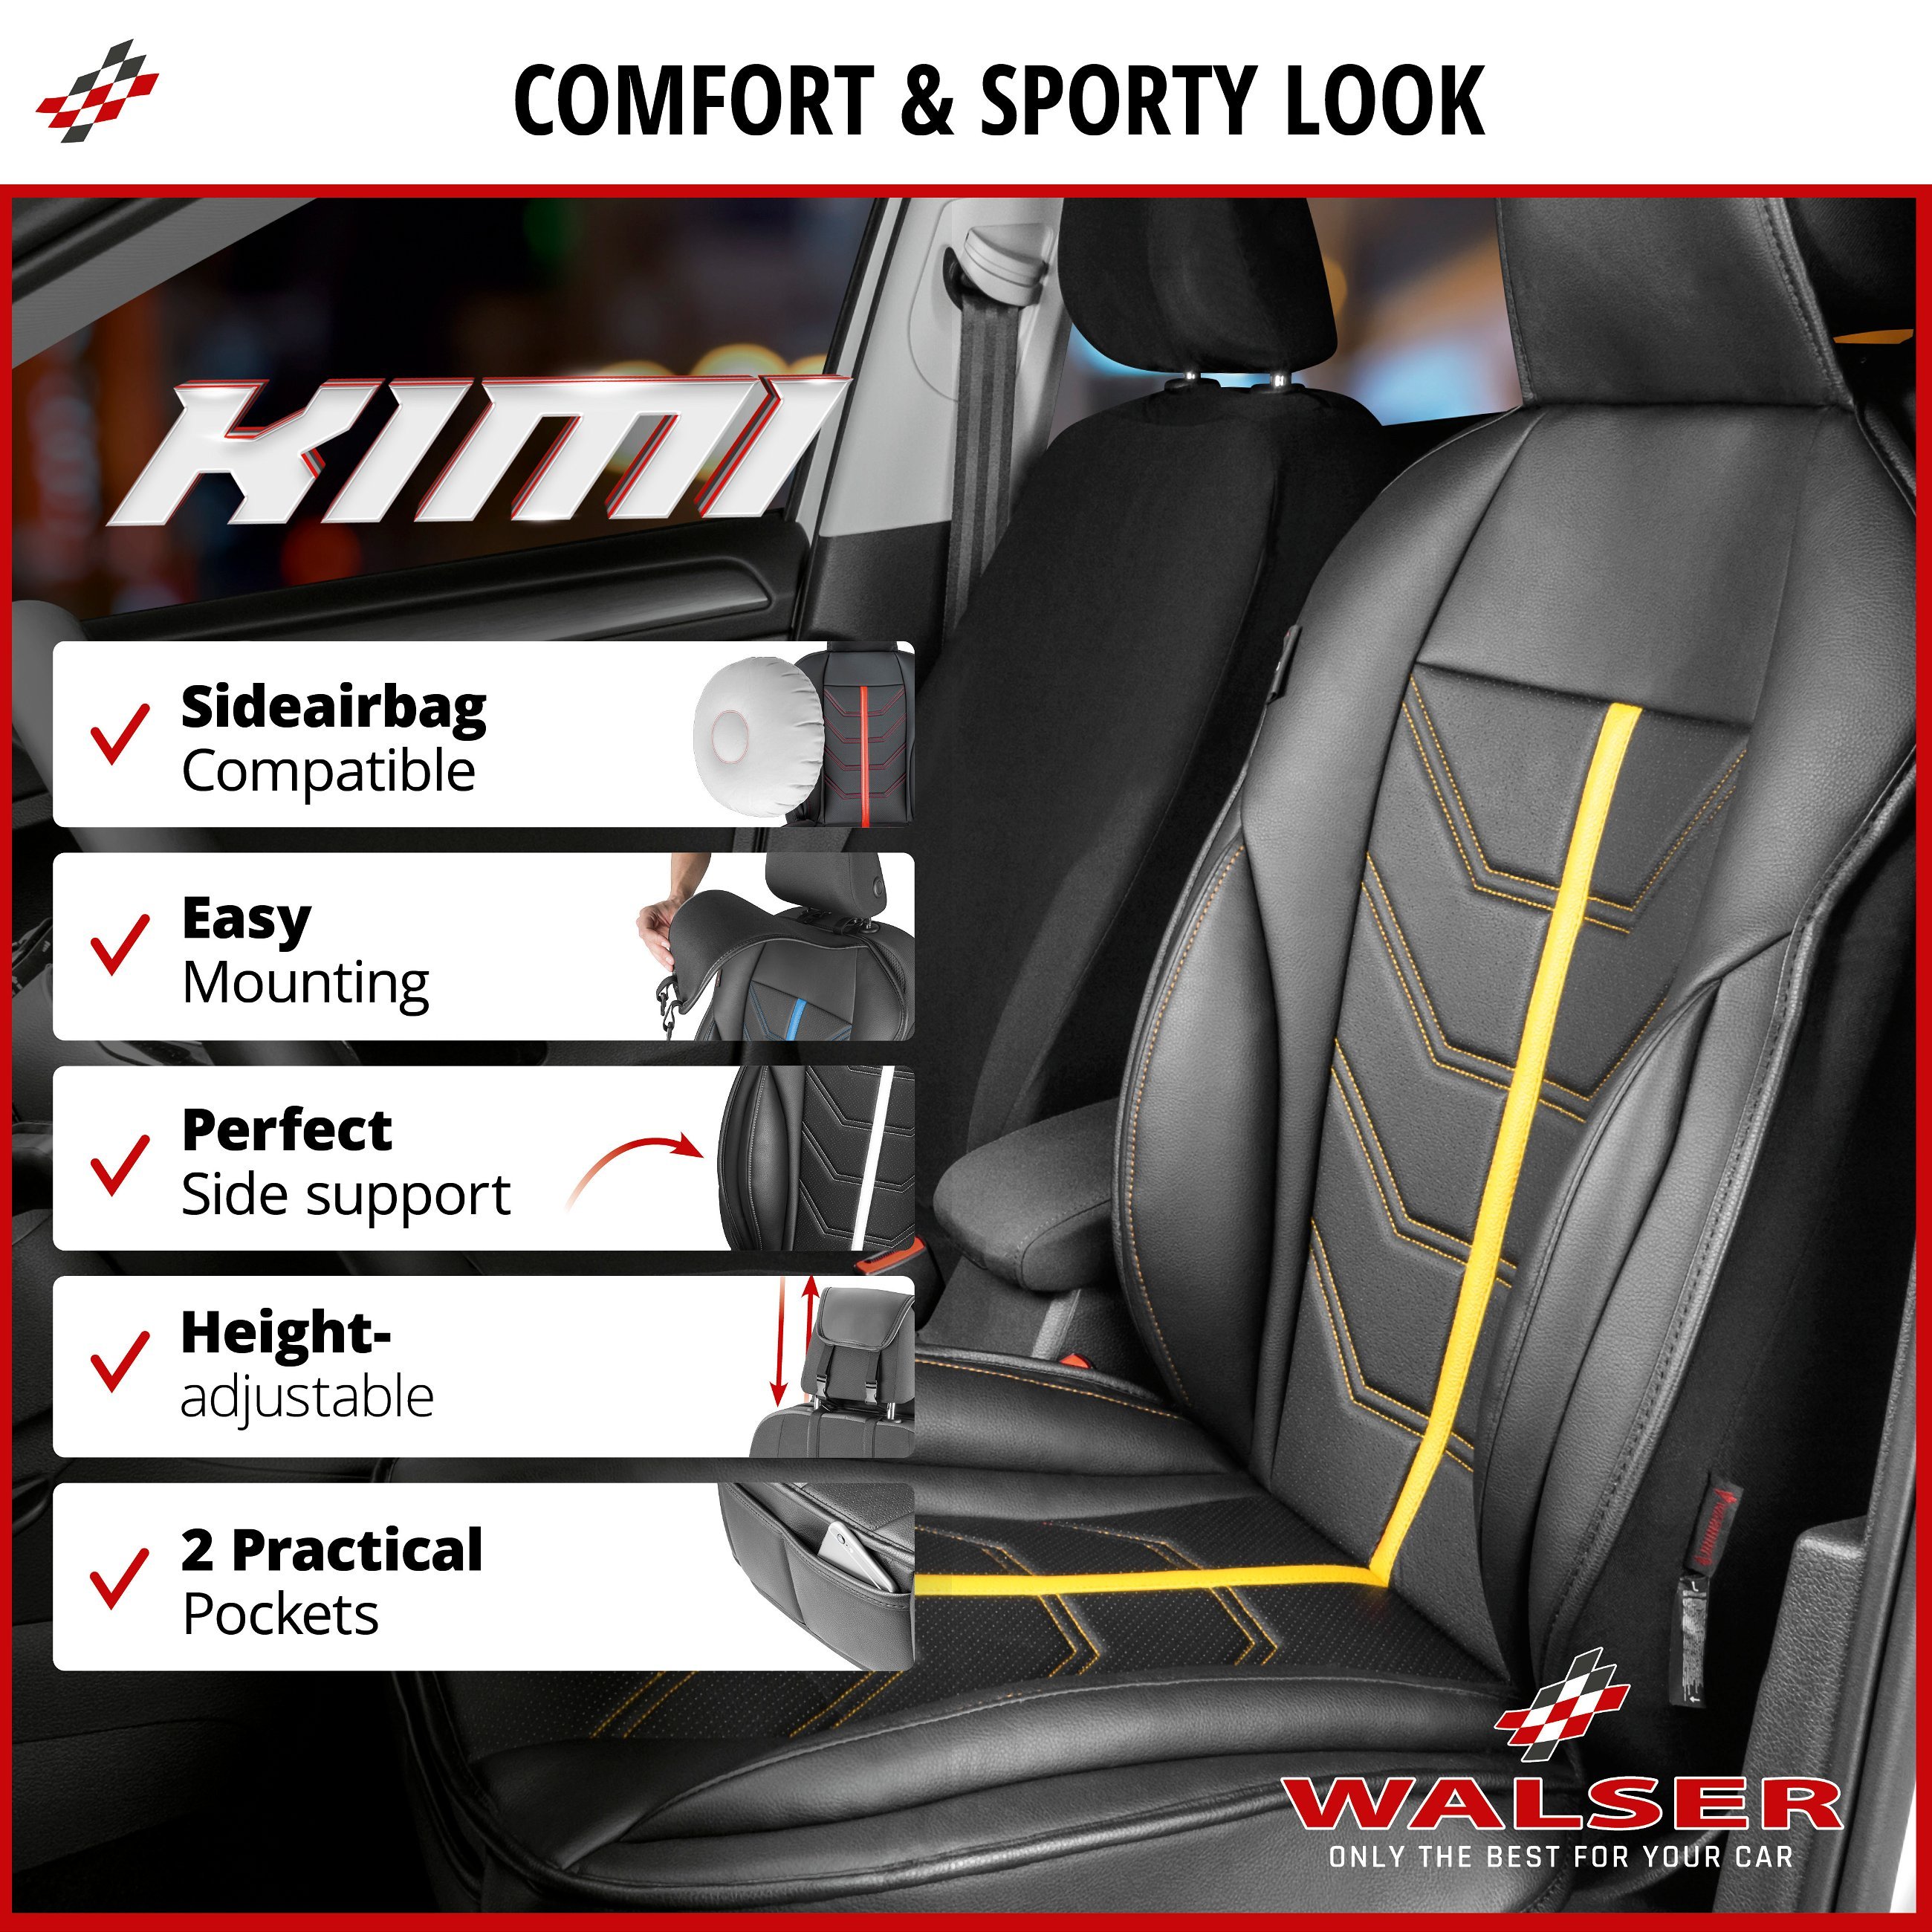 Car Seat cover Kimi, seat protector for cars in racing look black/yellow